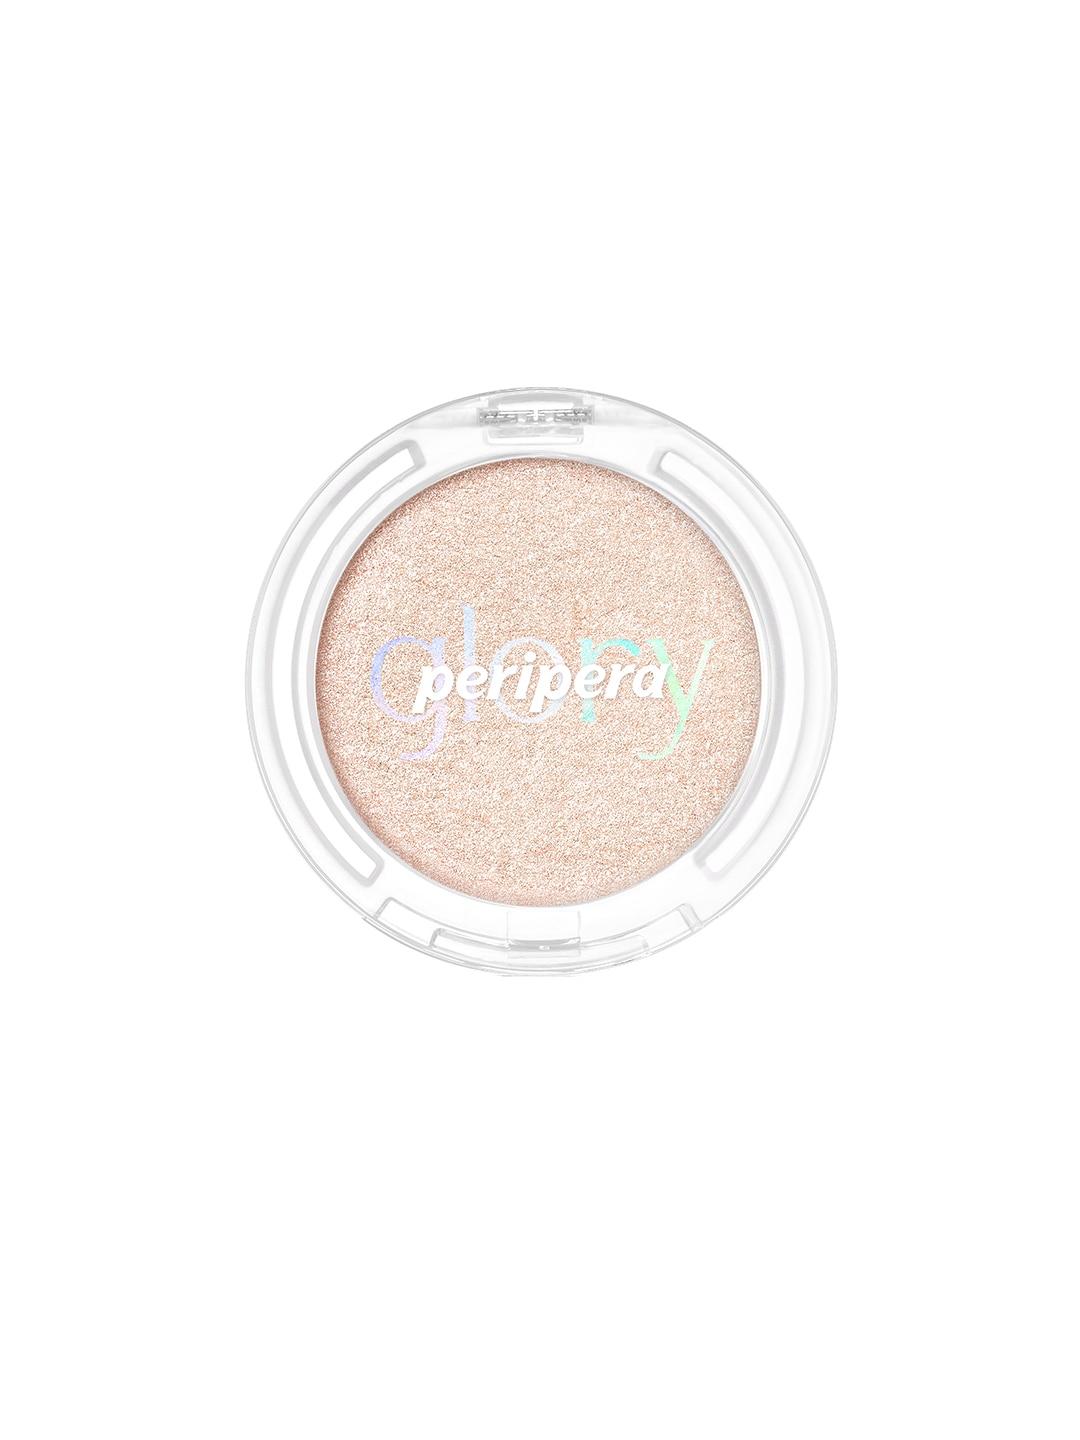 peripera pure glory highly pigmented highlighter - day glory 01